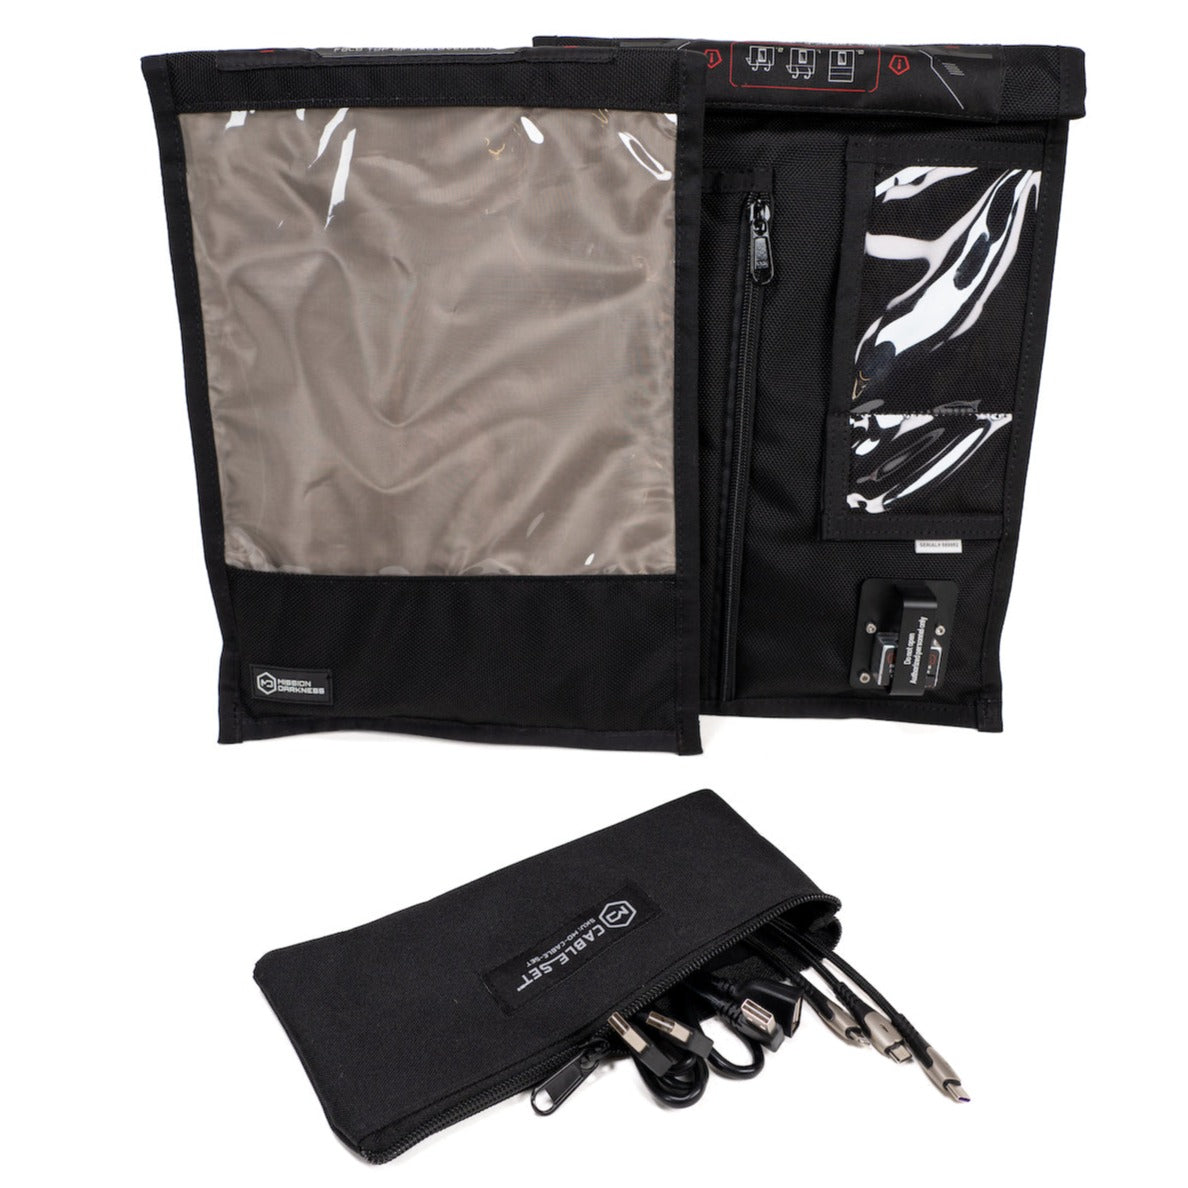 MISSION DARKNESS™ NEOLOK FARADAY BAG FOR TABLETS WITH BATTERY KIT - Teel  TechnologiesTeel Technologies